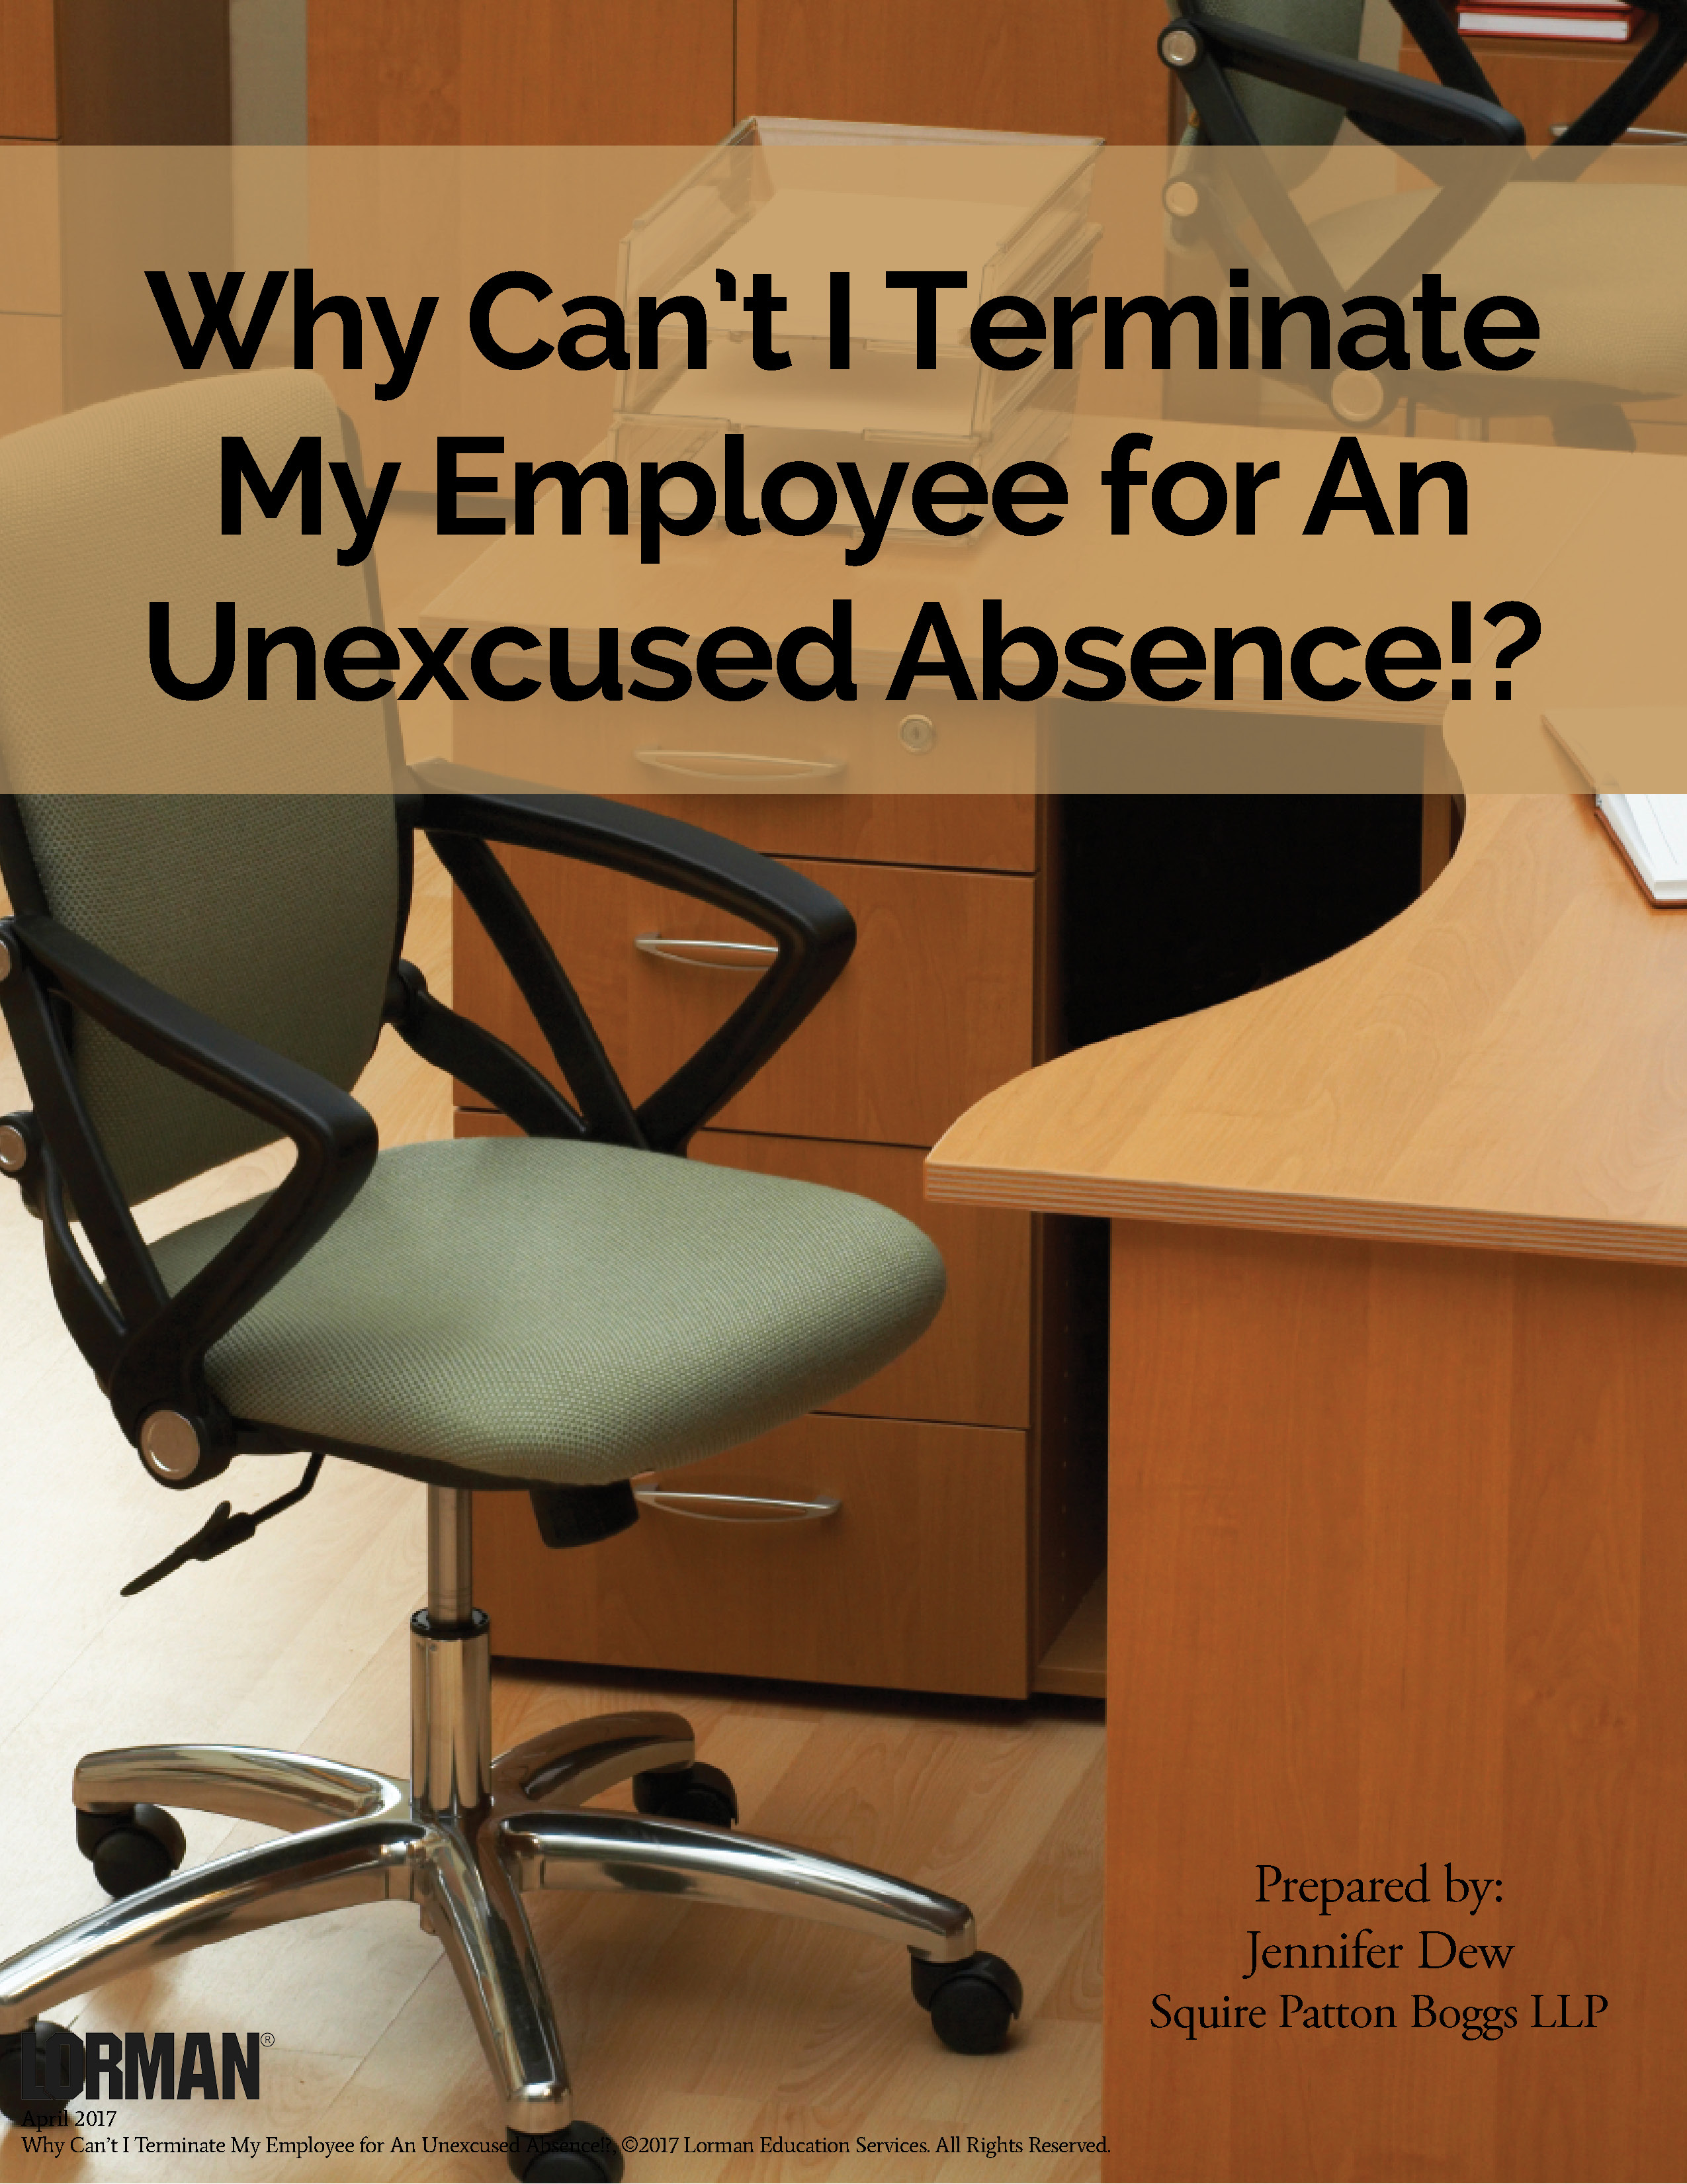 Why Can’t I Terminate My Employee for An Unexcused Absence